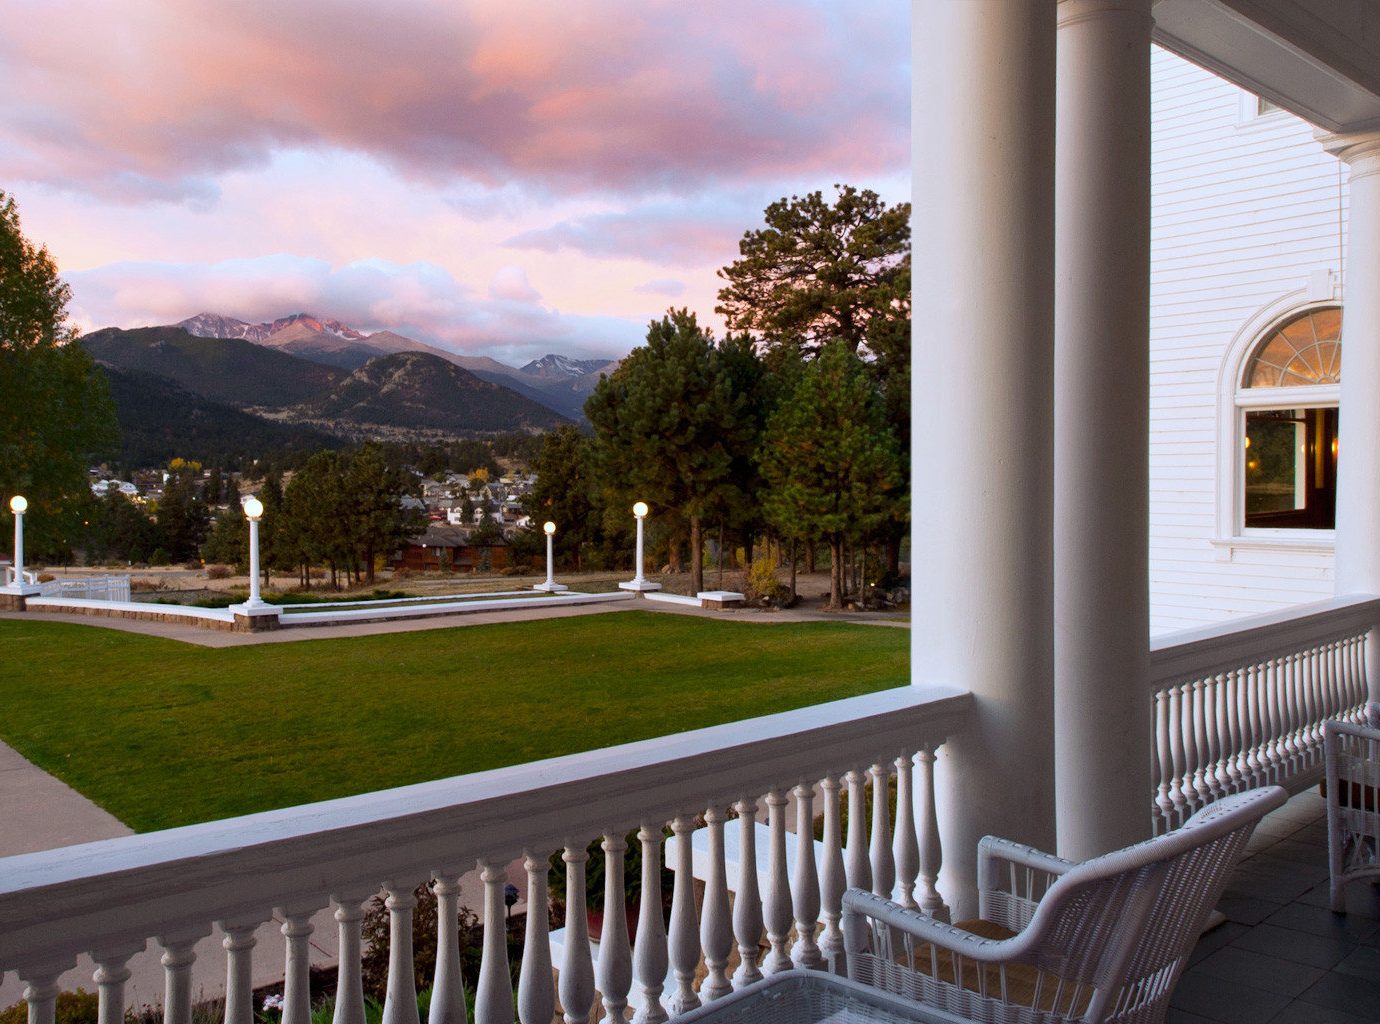 Balcony Historic Hotels Mountains Patio Resort Scenic views outdoor building property house estate home Architecture vacation residential area porch real estate Villa interior design backyard mansion overlooking Deck area colonnade